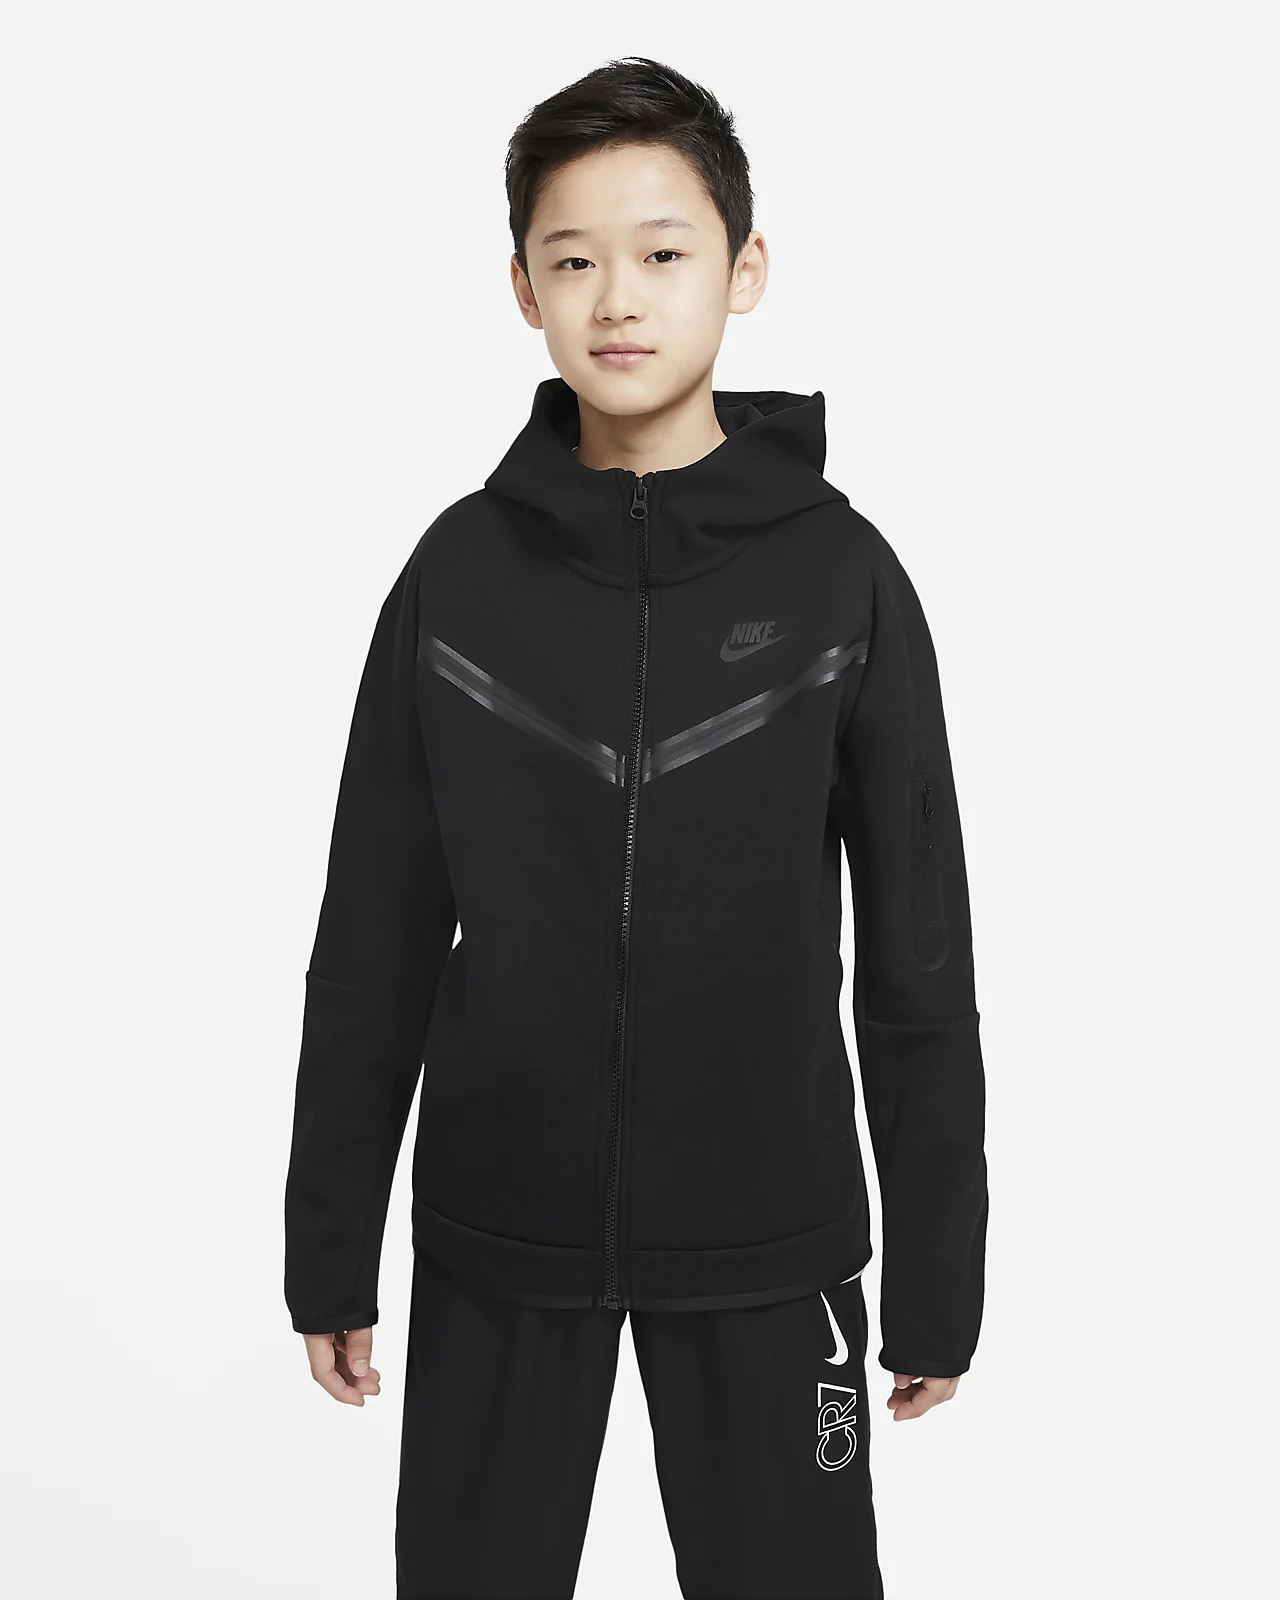 Nike Tech Kids: Bringing Revolutionary Comfort and Performance to ...